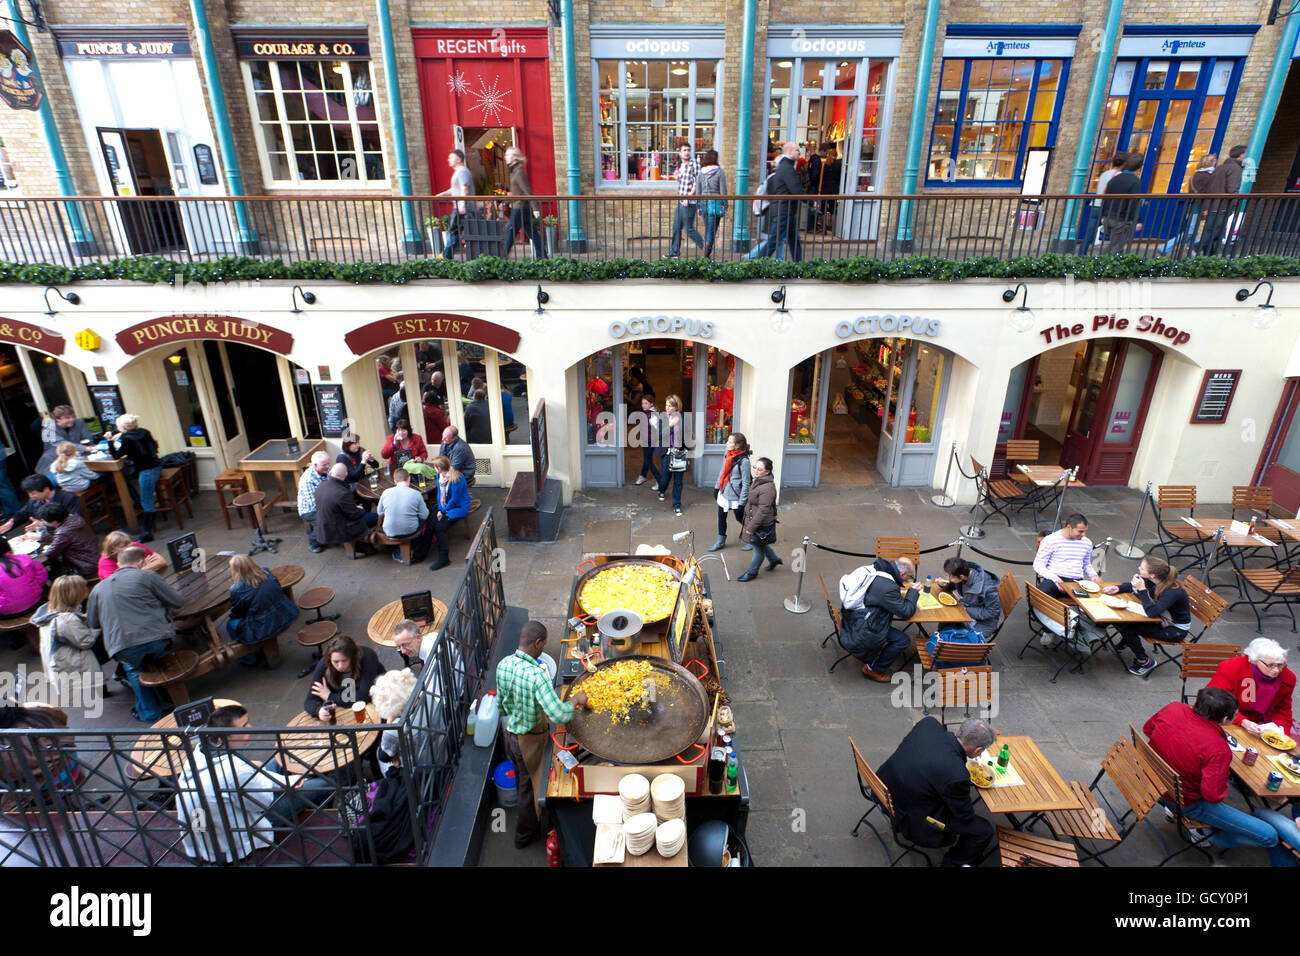 Restaurants and shops in a former market hall in Covent Garden district